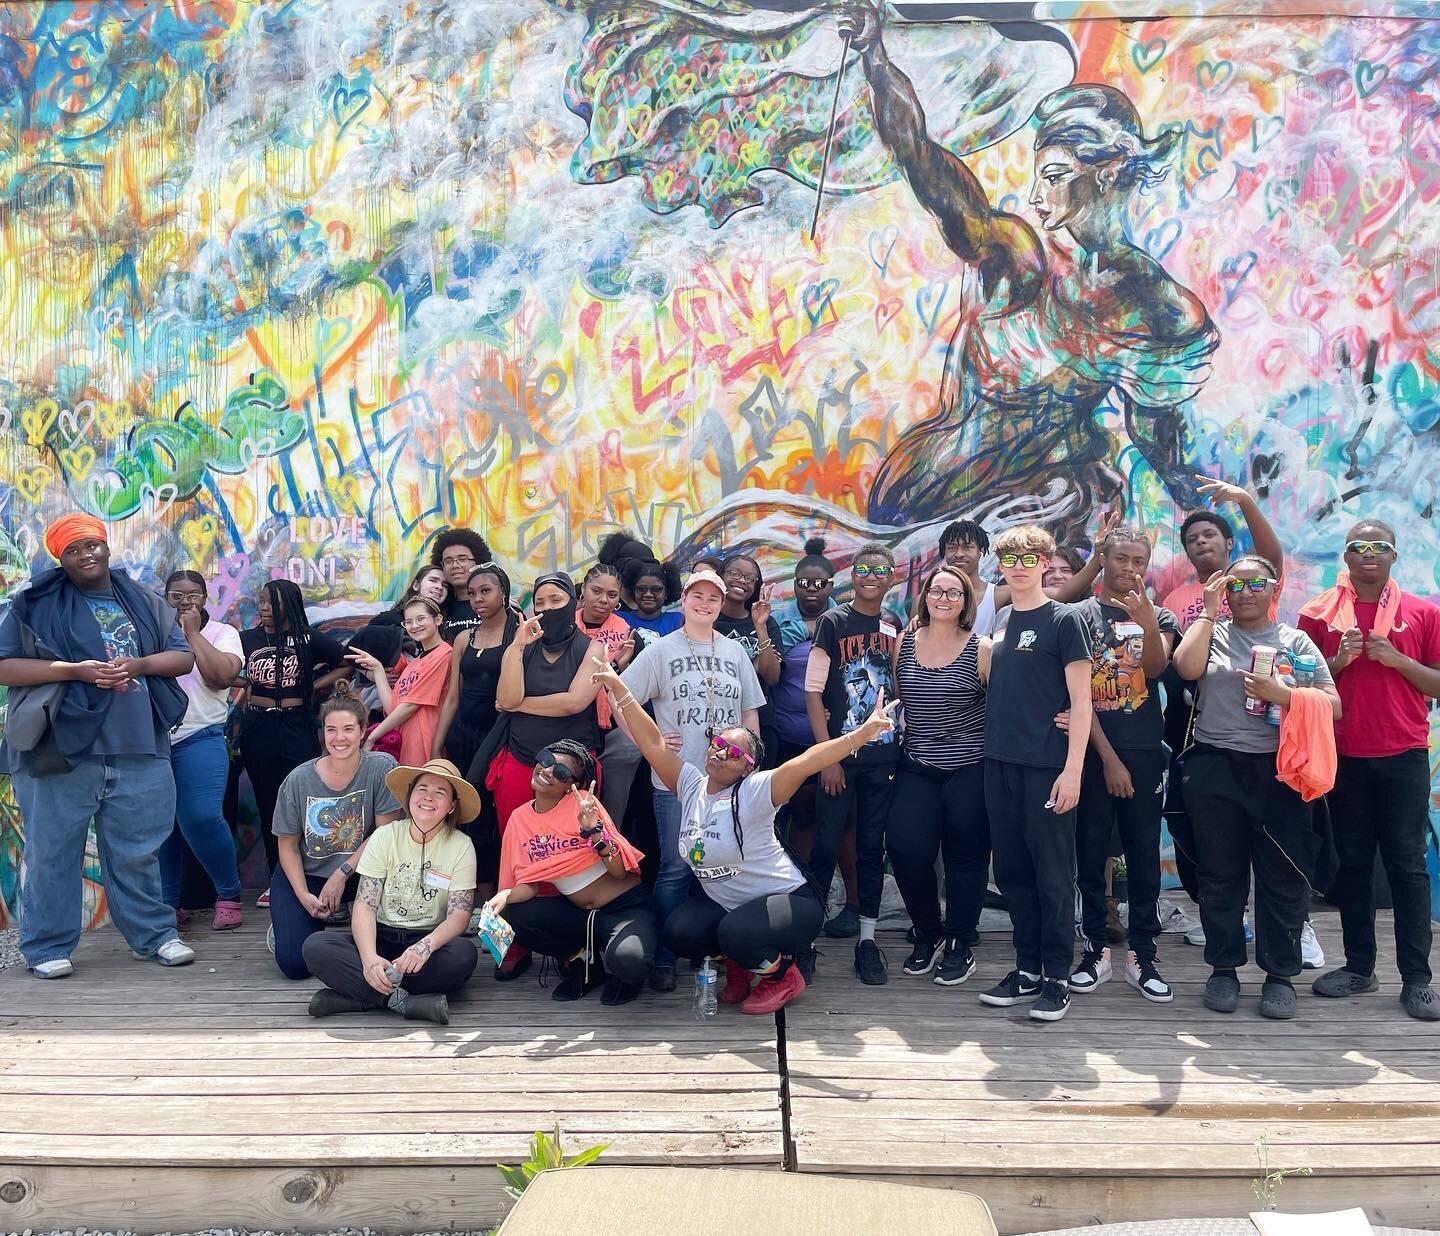 Huge thank you to @pittsburghcares @braddockyouthproject and students and teachers from @propelschools1 who joined us today to kick off our garden cleanup! We appreciate you!